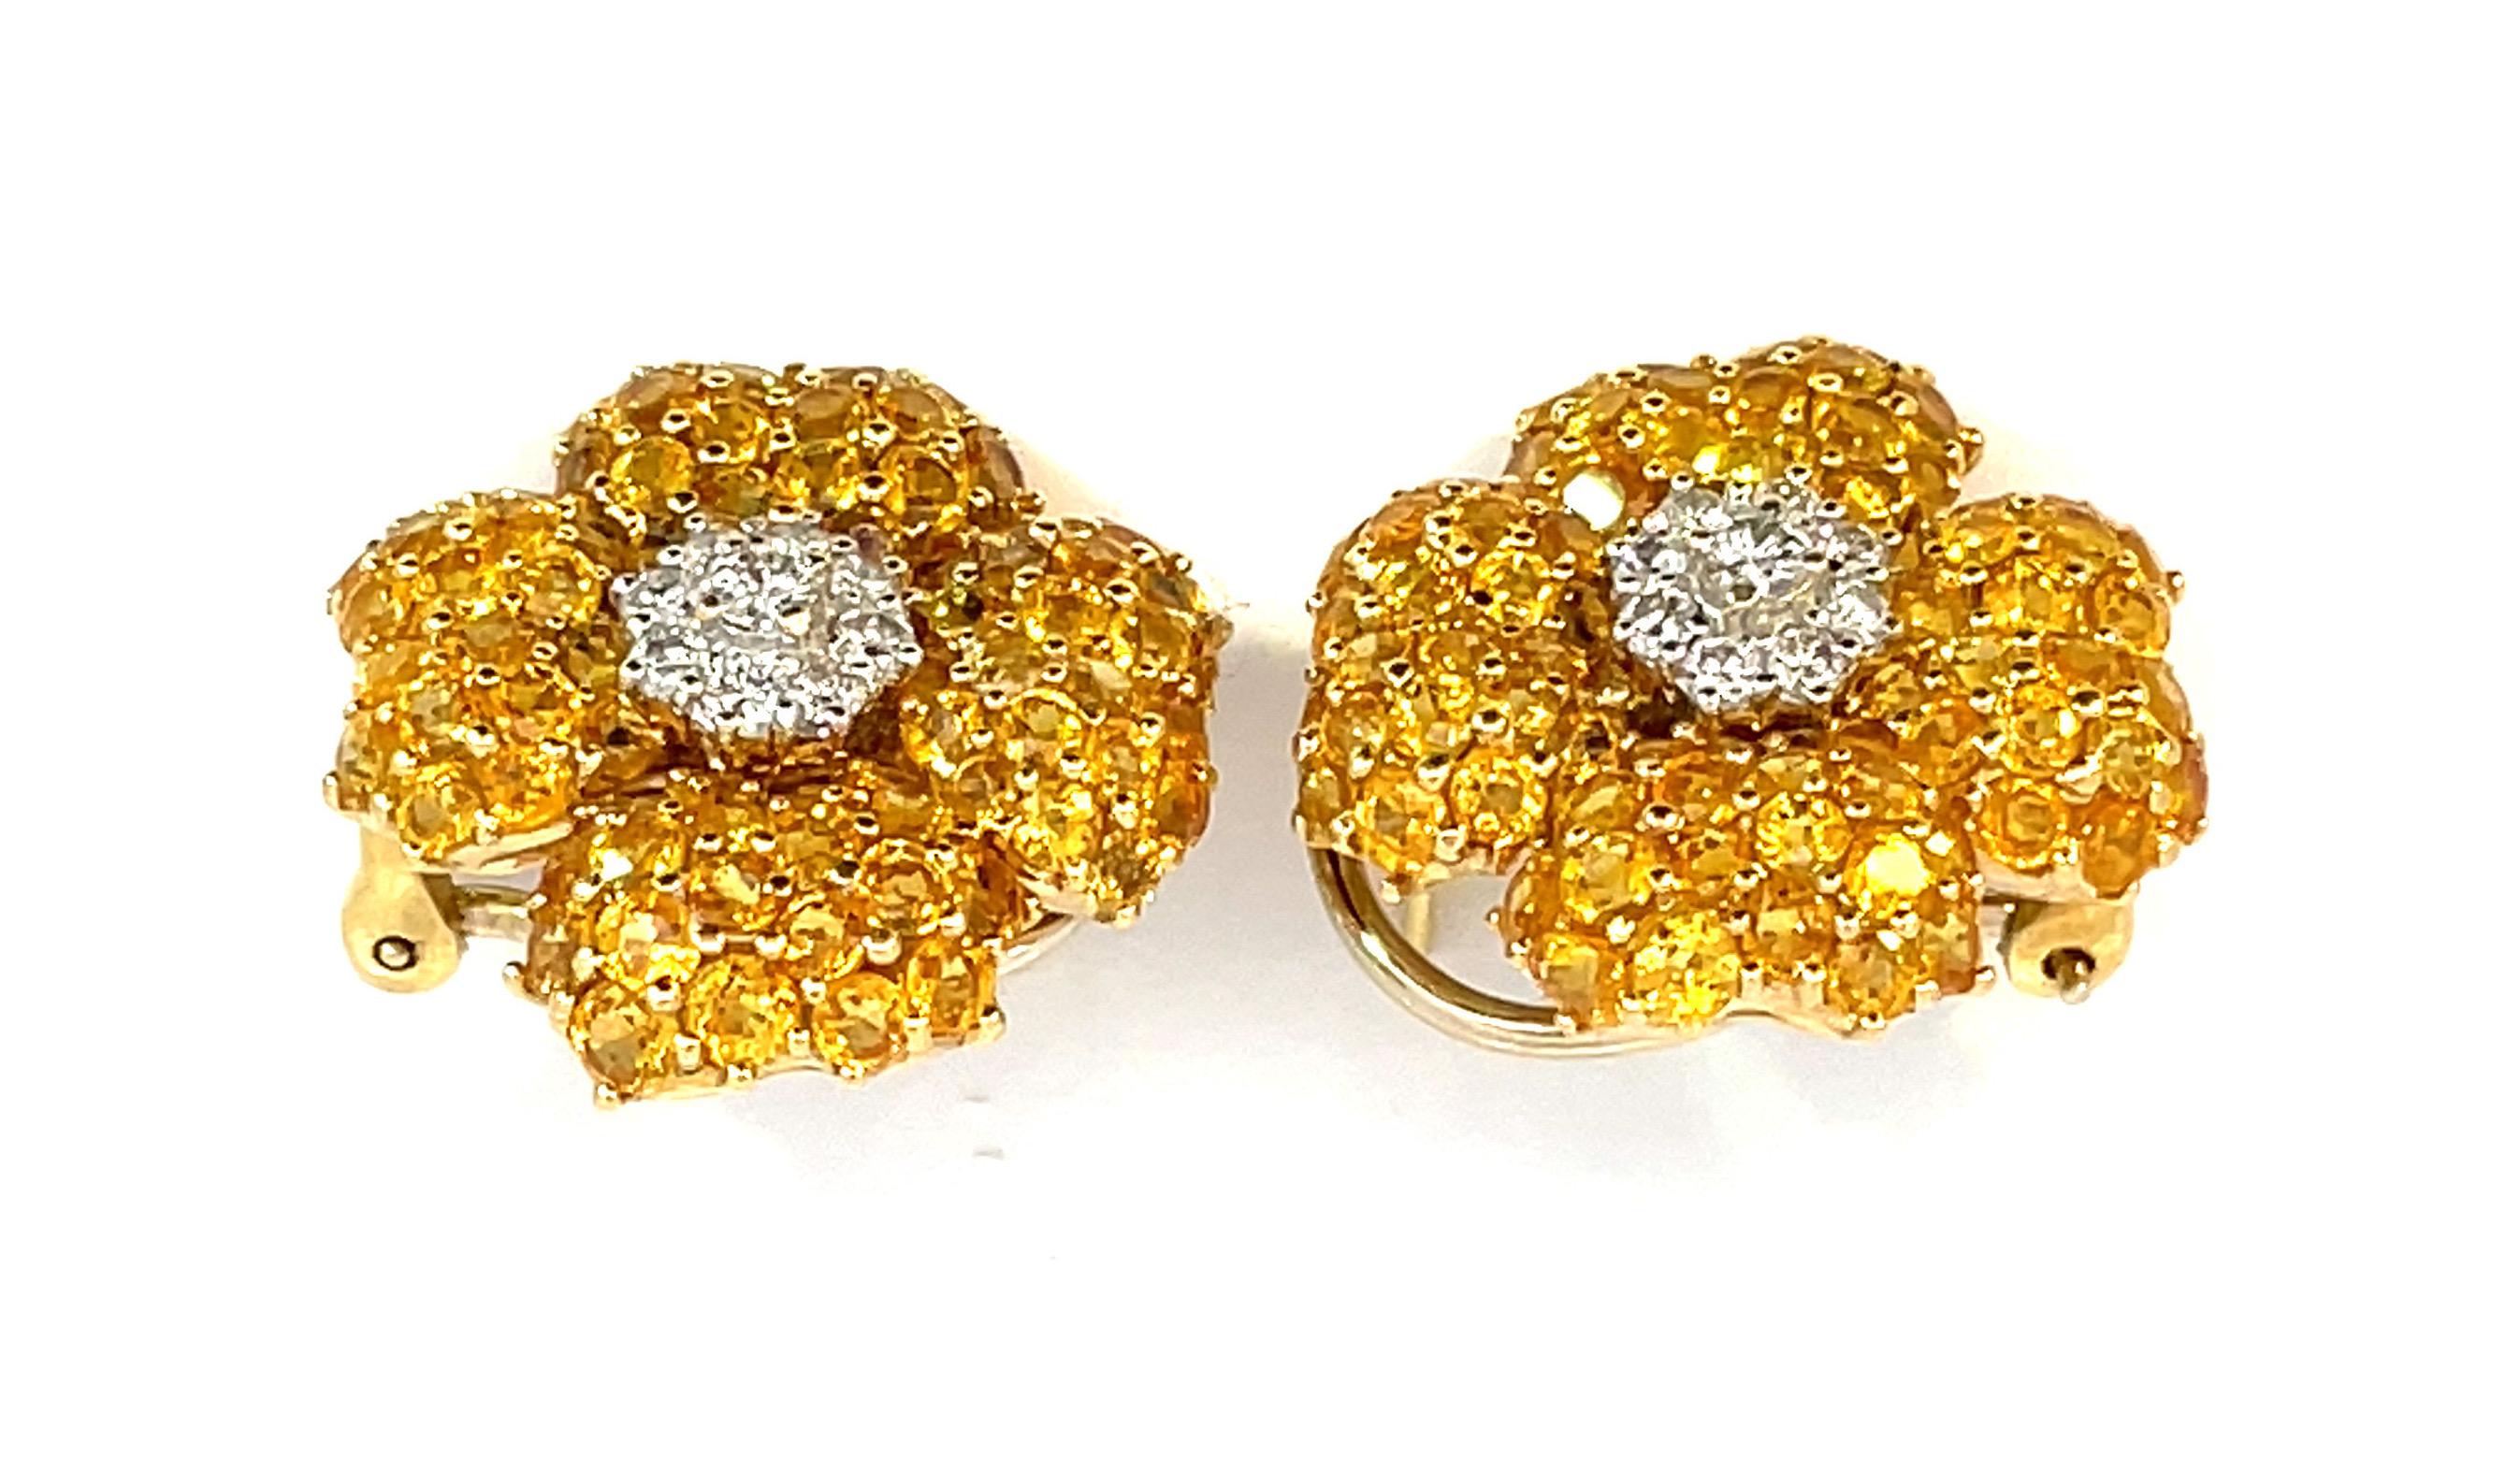 A large pair of natural yellow sapphire and natural diamond earrings set in yellow and white gold with a beautiful honeycomb à jour finishing a post and omega clip system.

18 Brilliant cut natural diamonds weighing 1.02ct total weight, quality